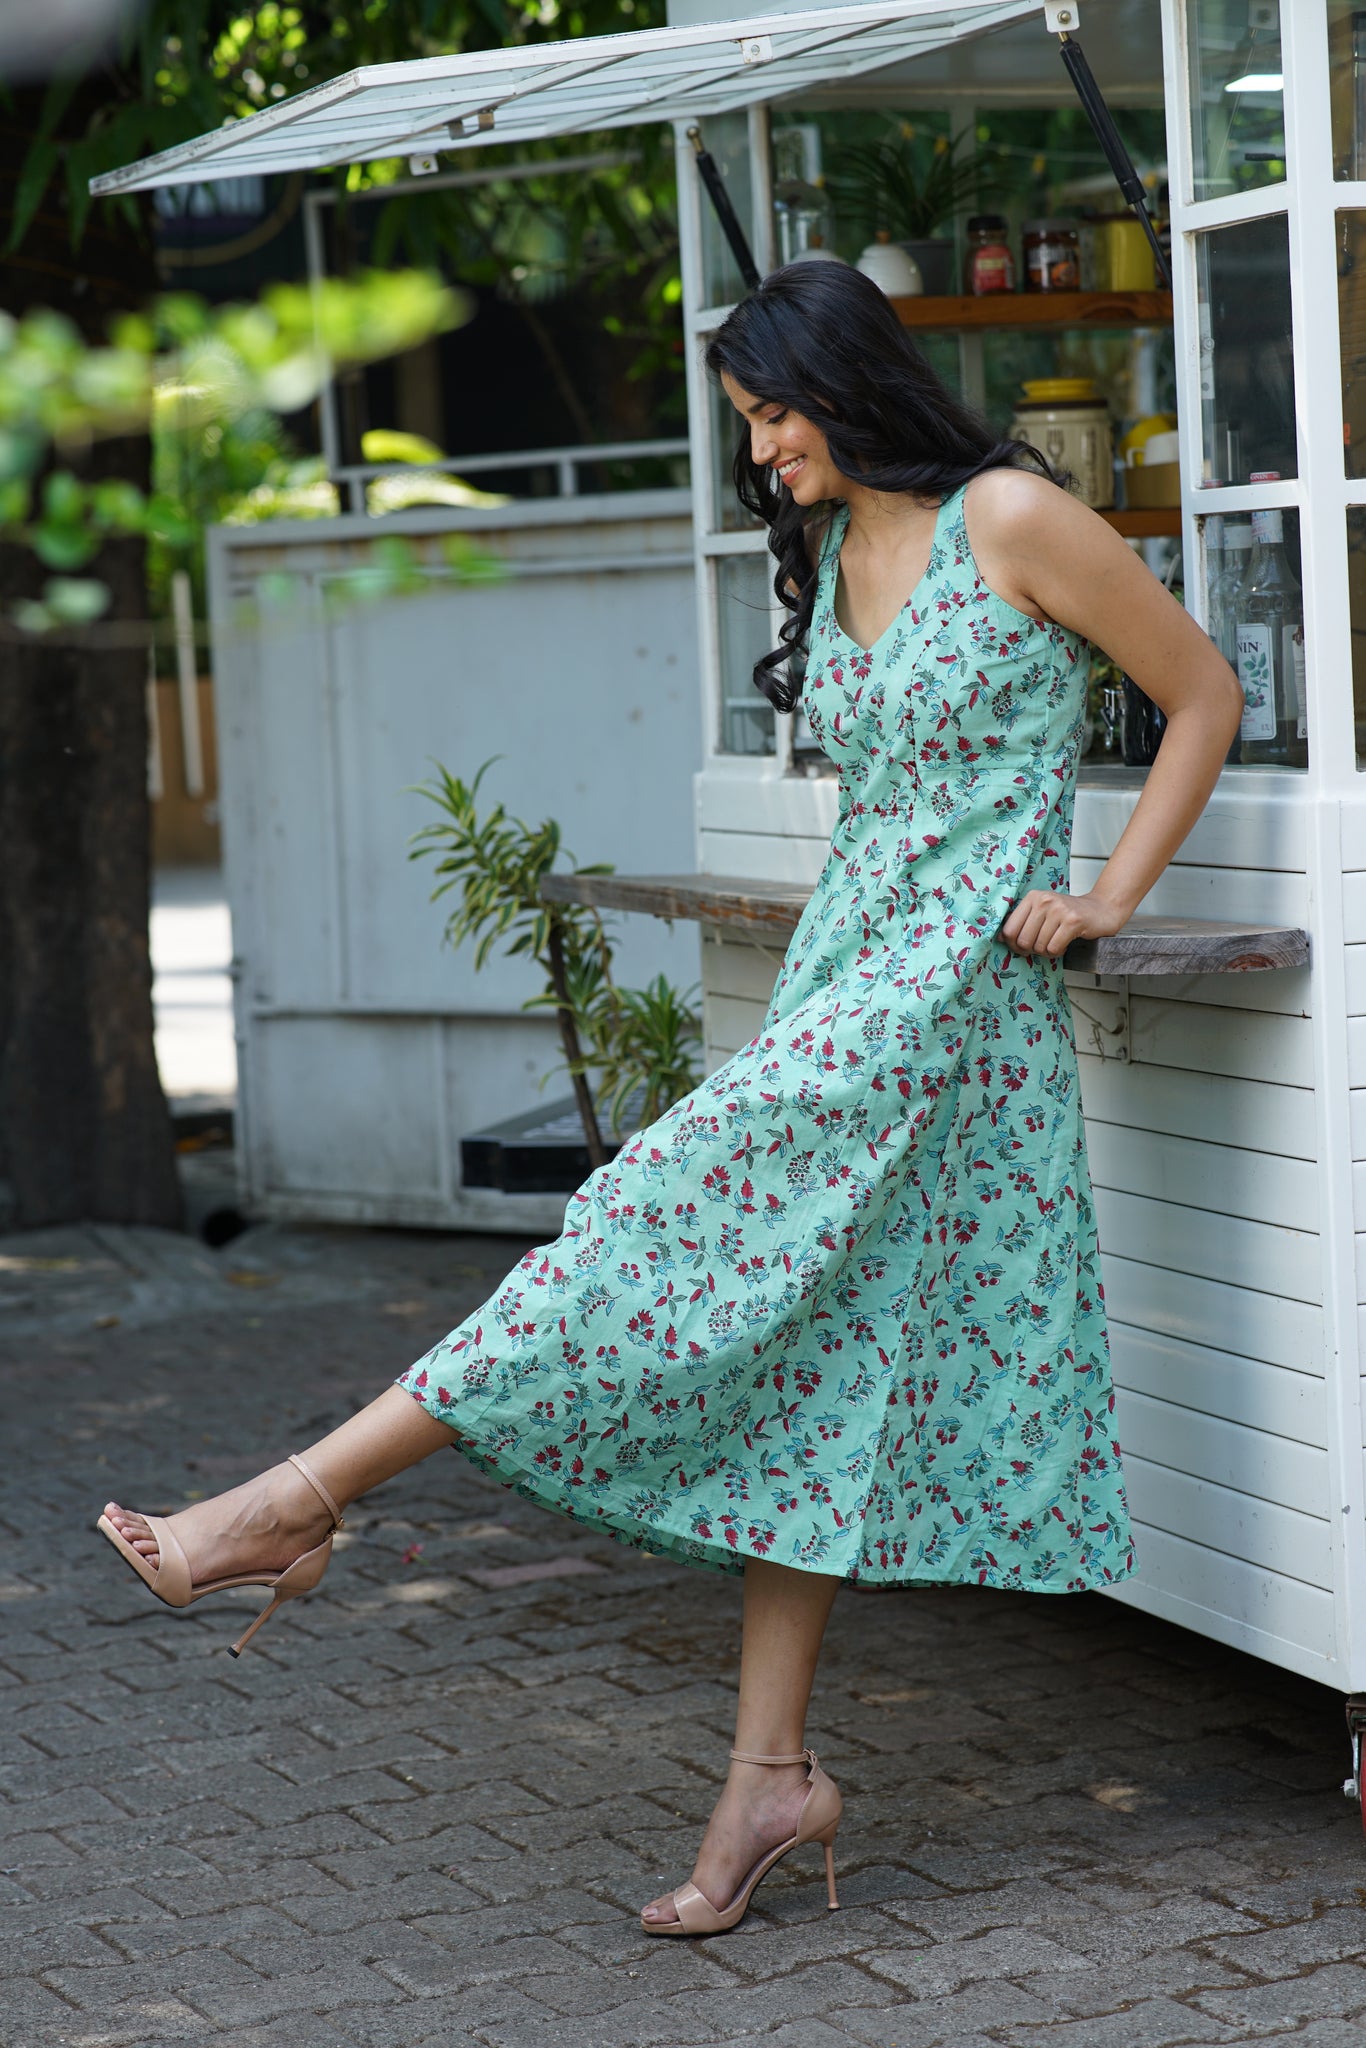 a woman in a green dress leaning against a truck.